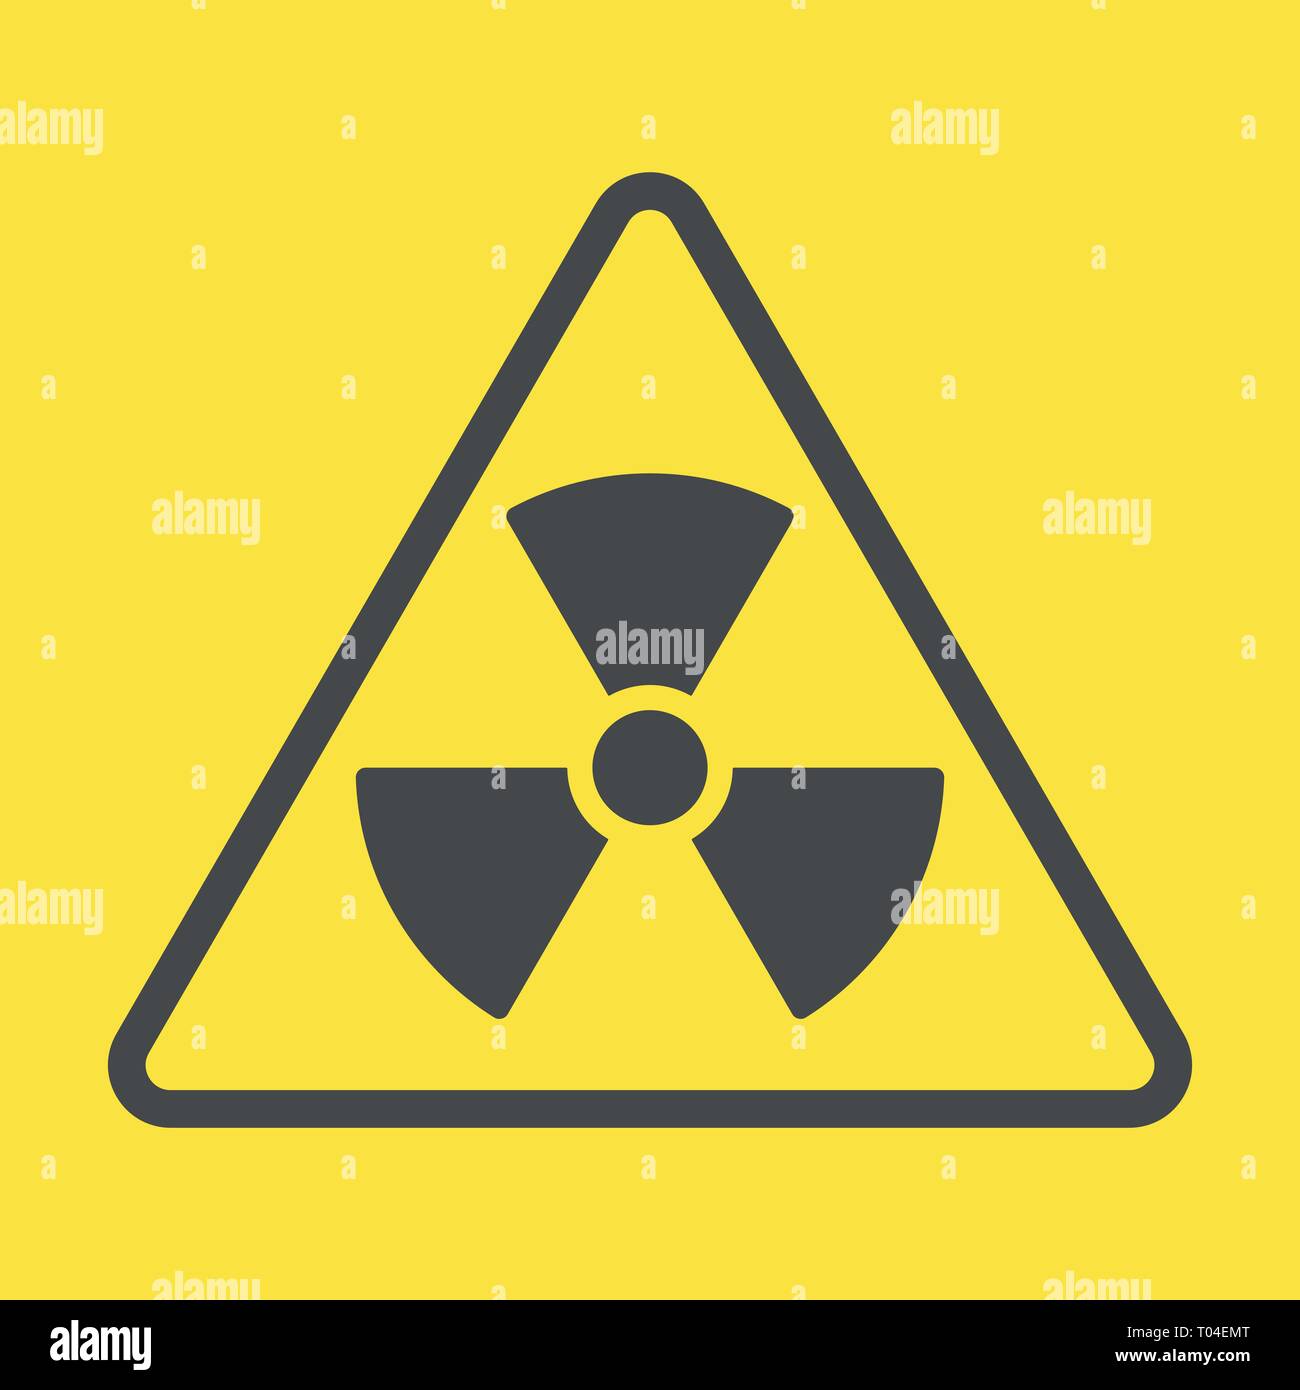 Radioactive zone, vector sign or symbol. Warning radioactive zone in triangle icon isolated on yellow background with stripes. Radioactivity Stock Vector